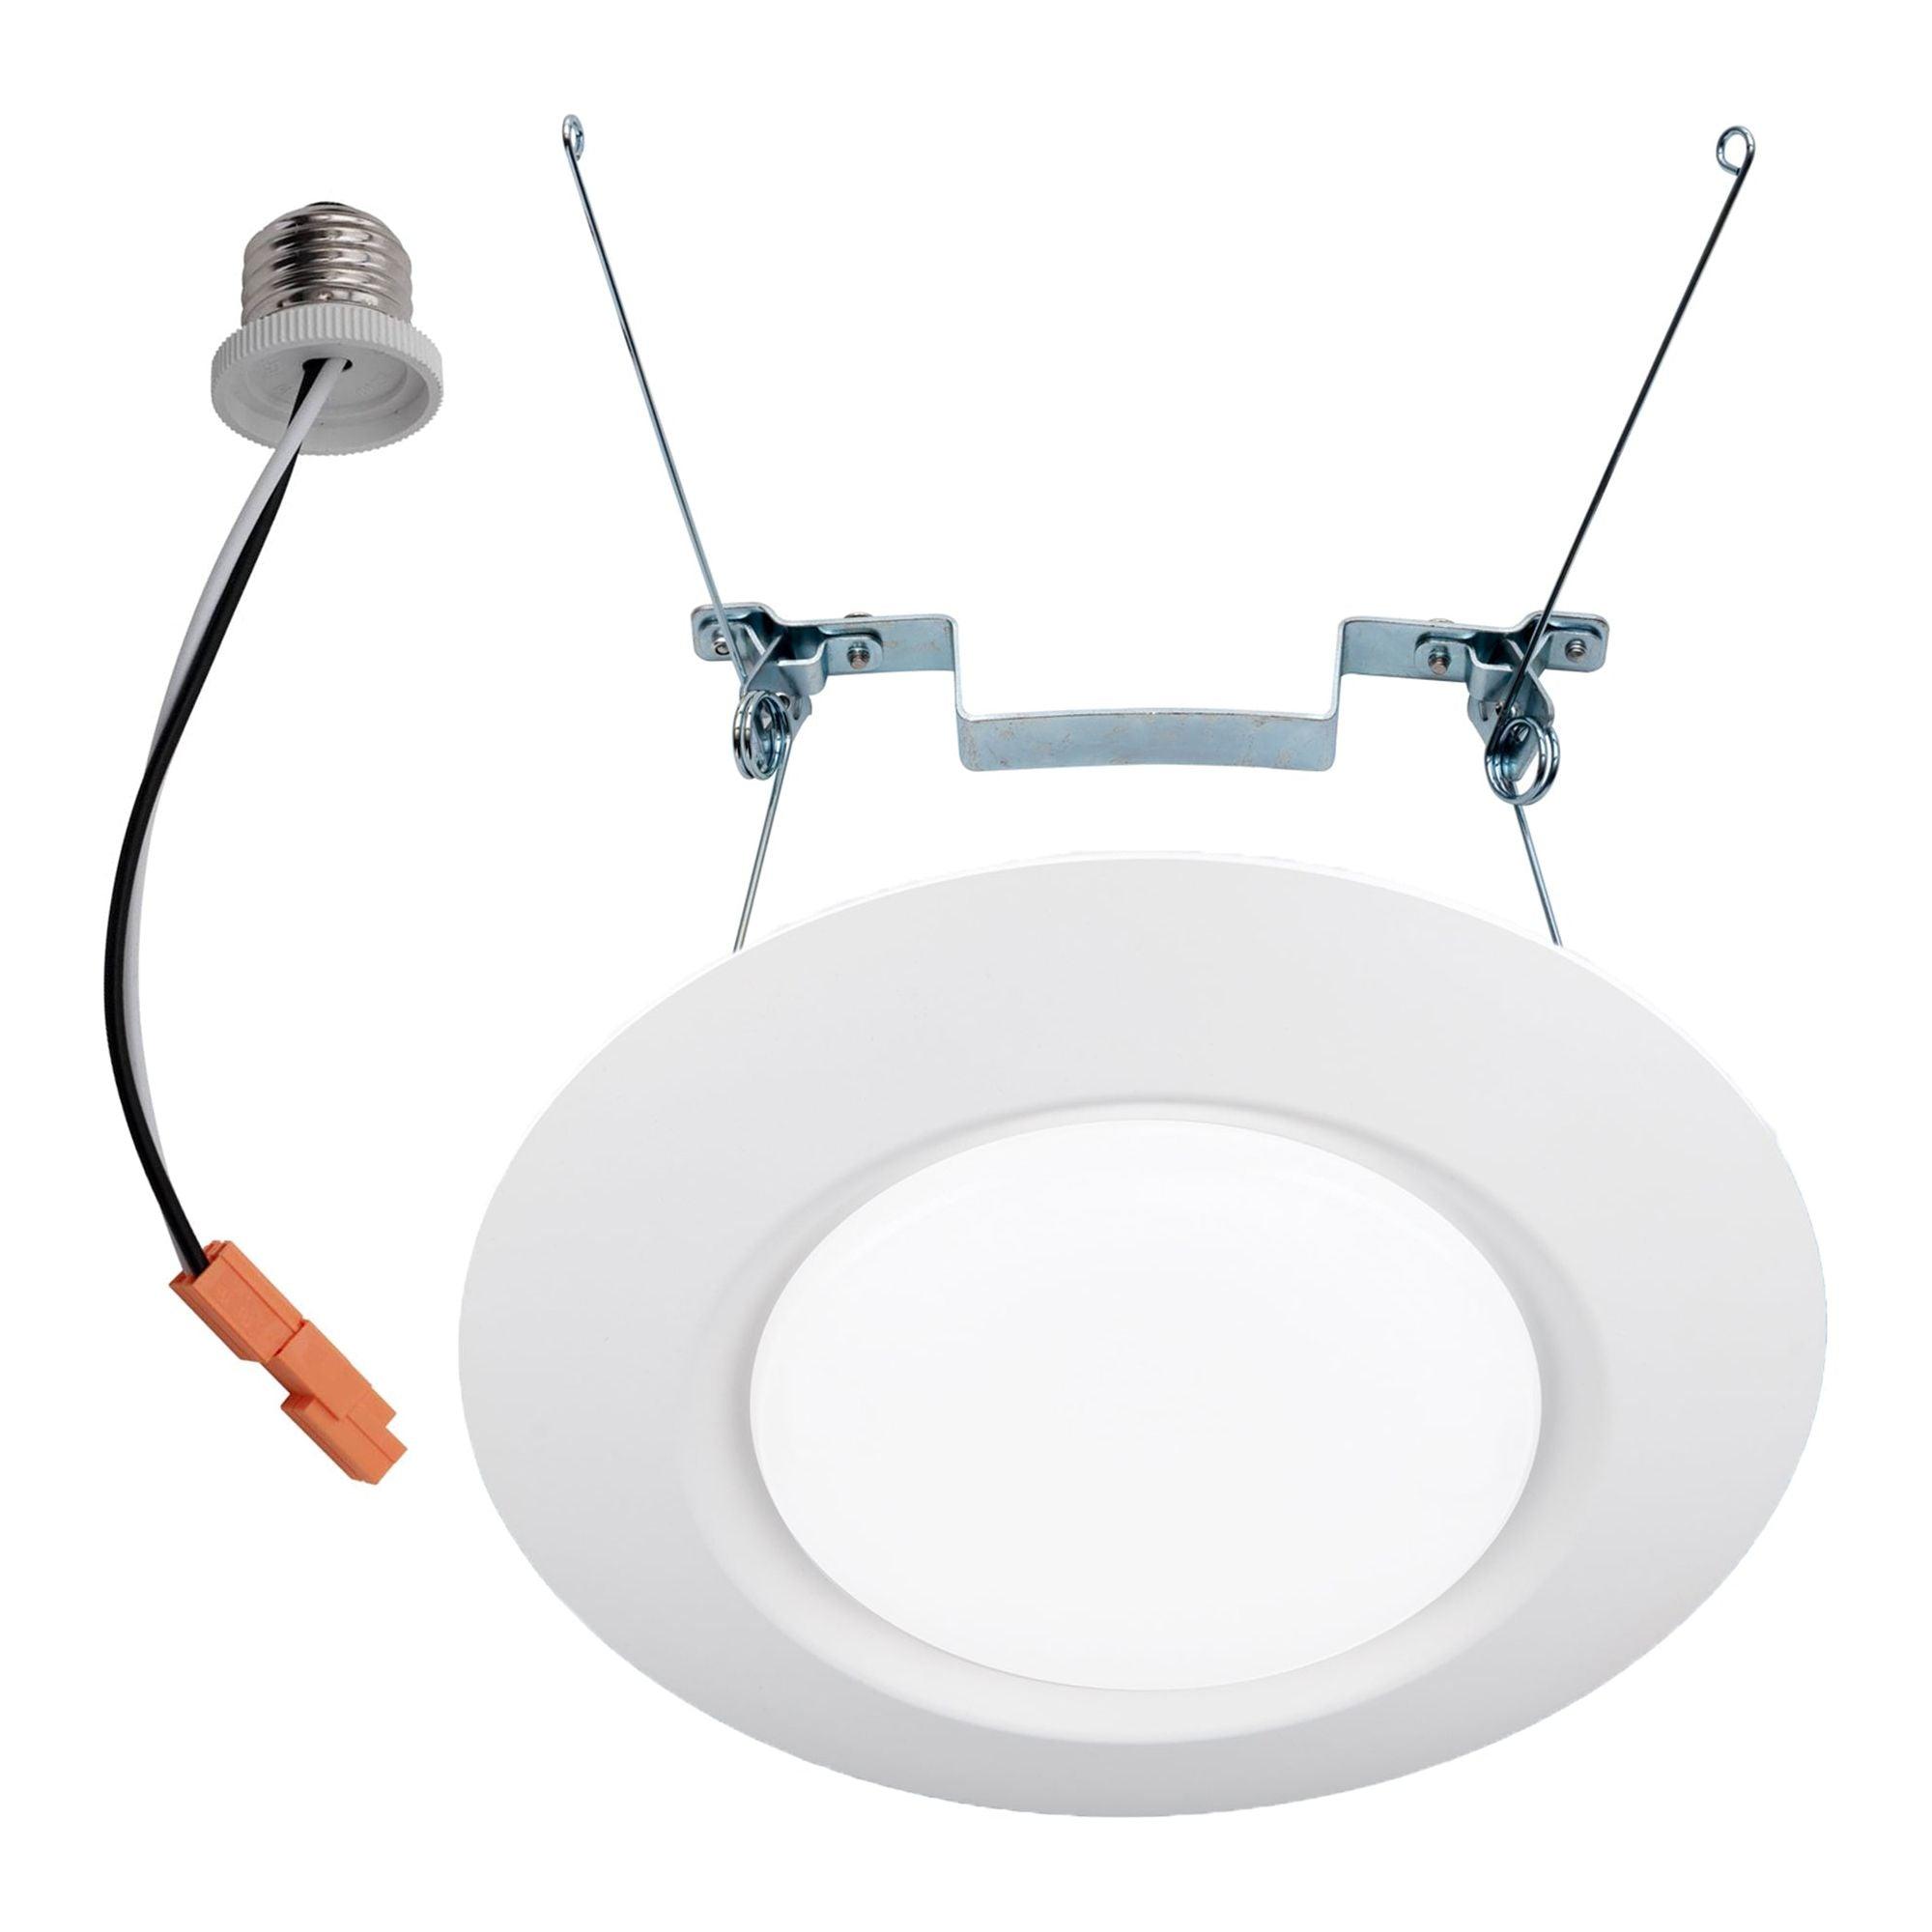 WAC Lighting - I Can't Believe It's Not Recessed LED Energy Star Flush Mount & Retrofit Kit - Lights Canada